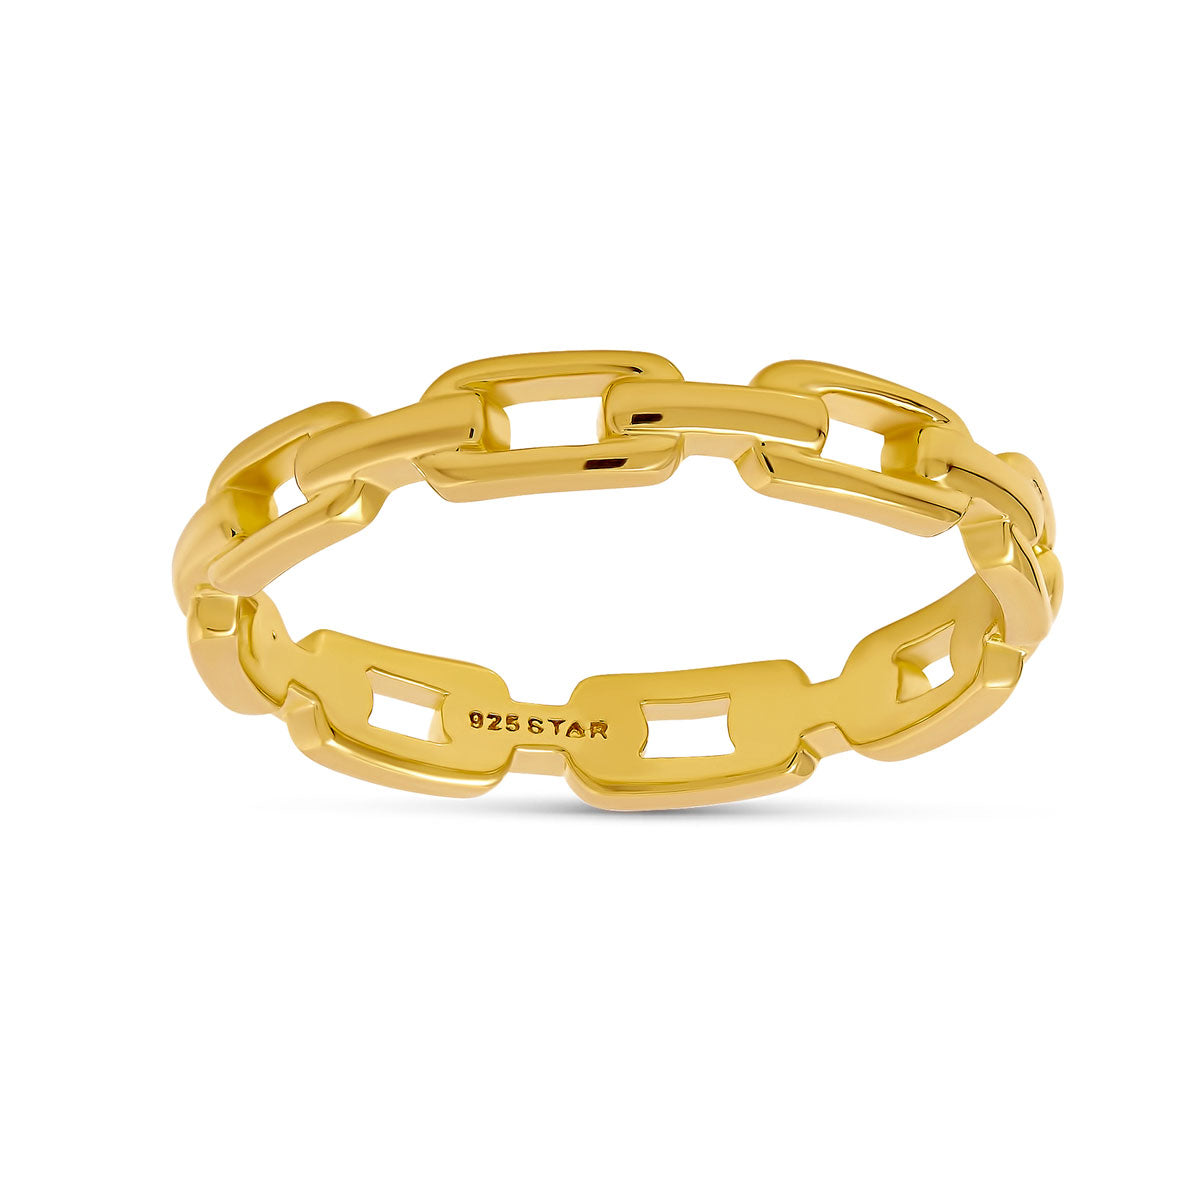 Cable Chain Ring Gold